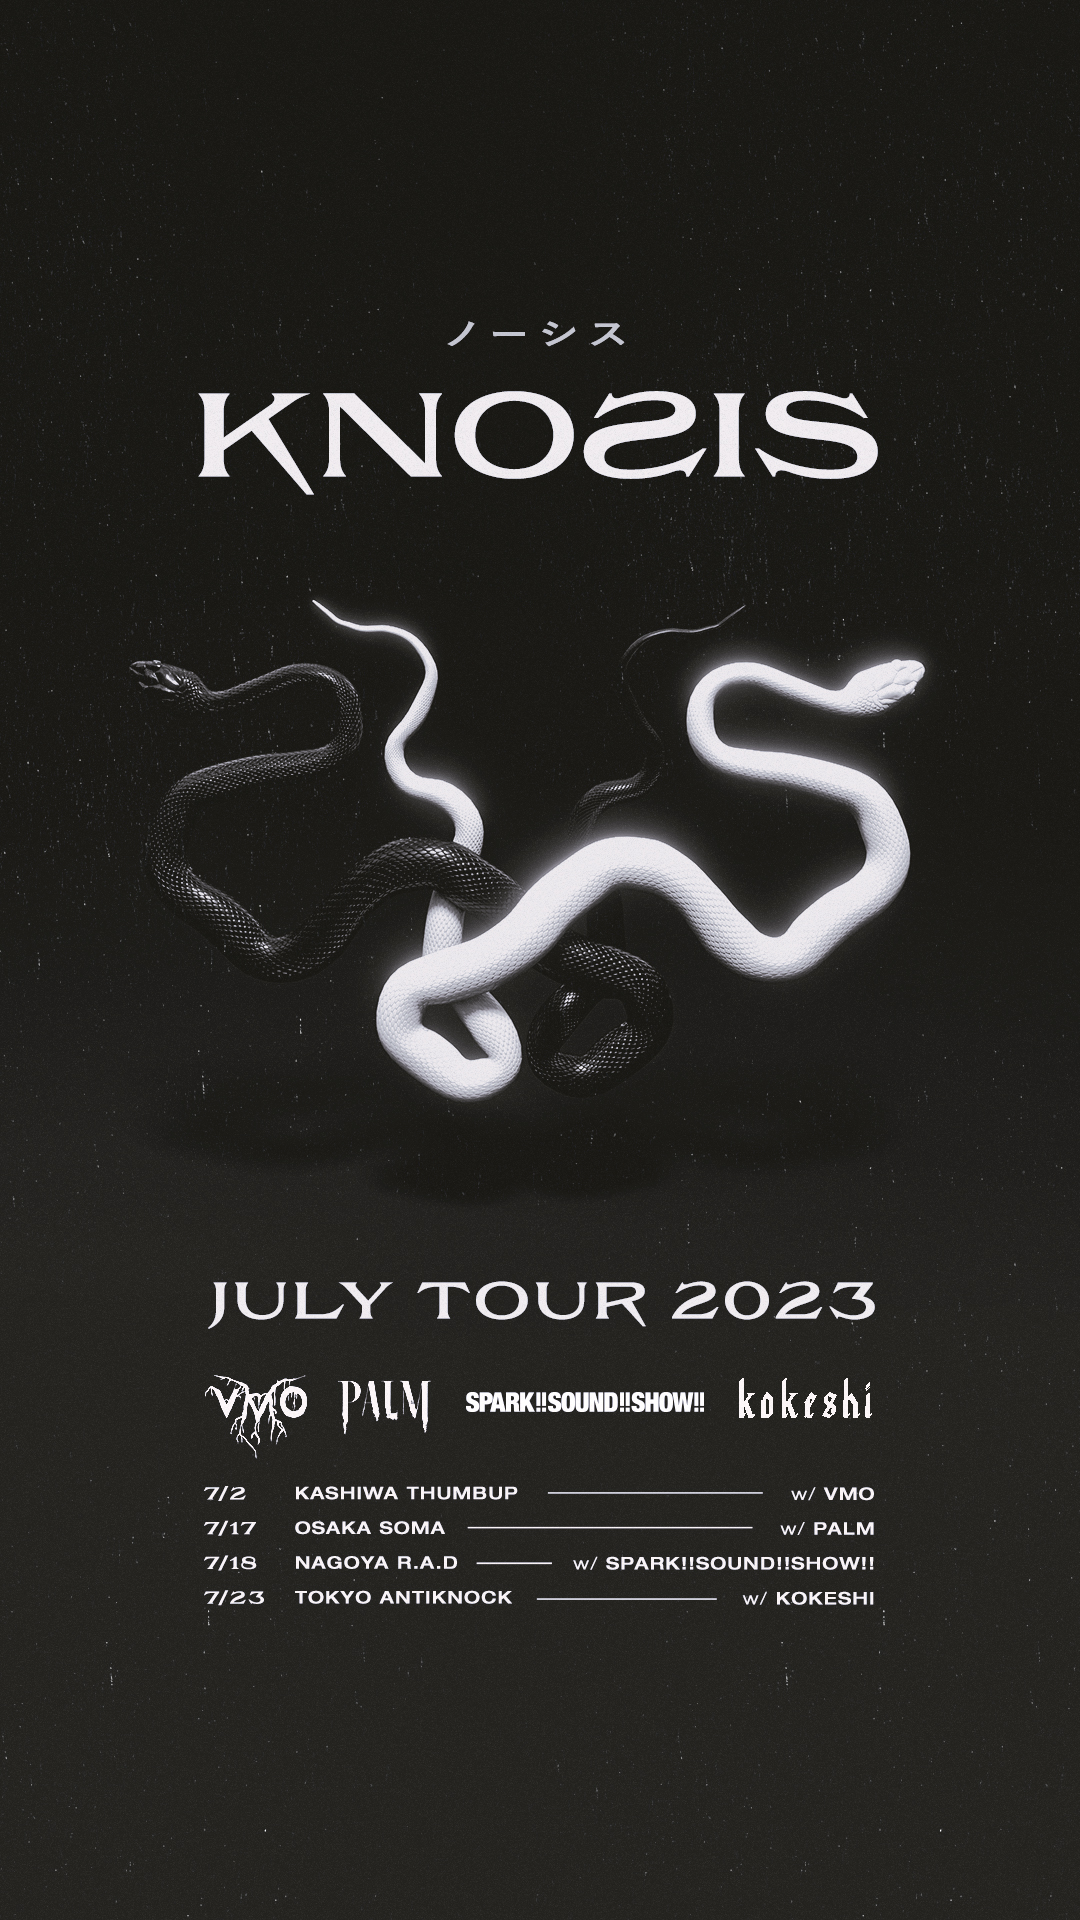 KNOSIS JULY TOUR 2023